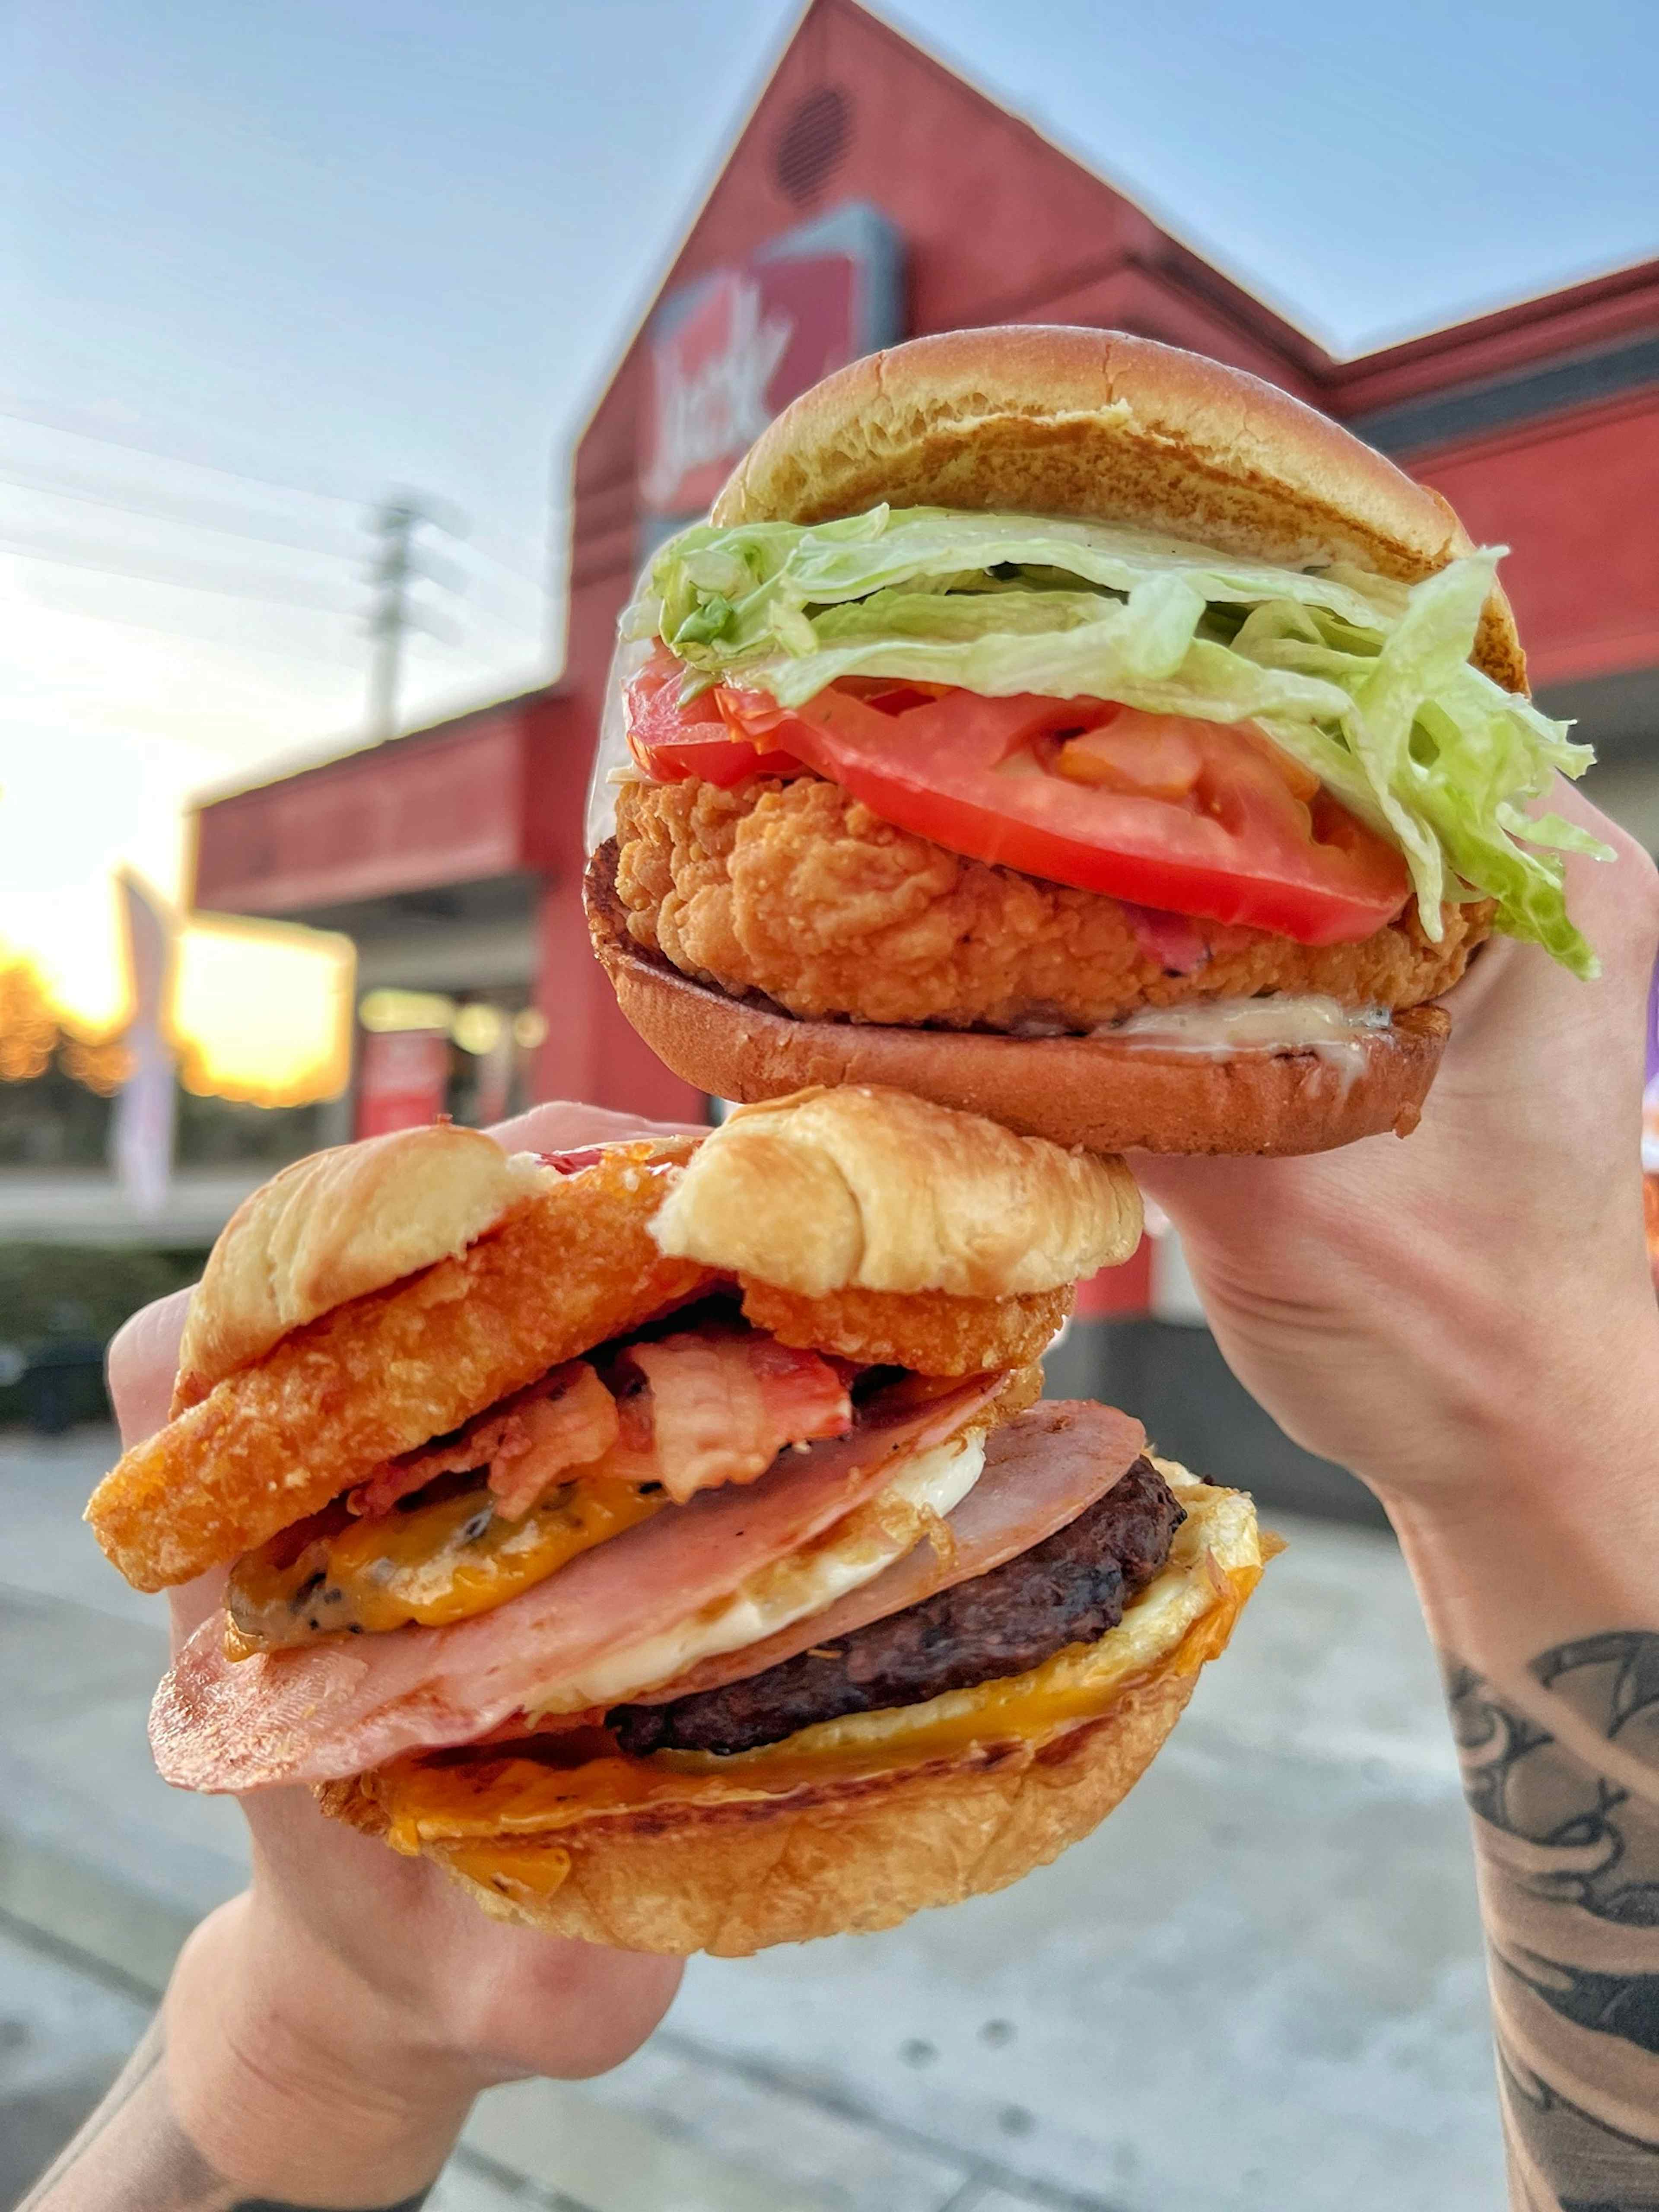 Crispy chicken sandwich and burger featured at Jack in the Box of Idaho Falls within the Yellowstone Teton Territory.